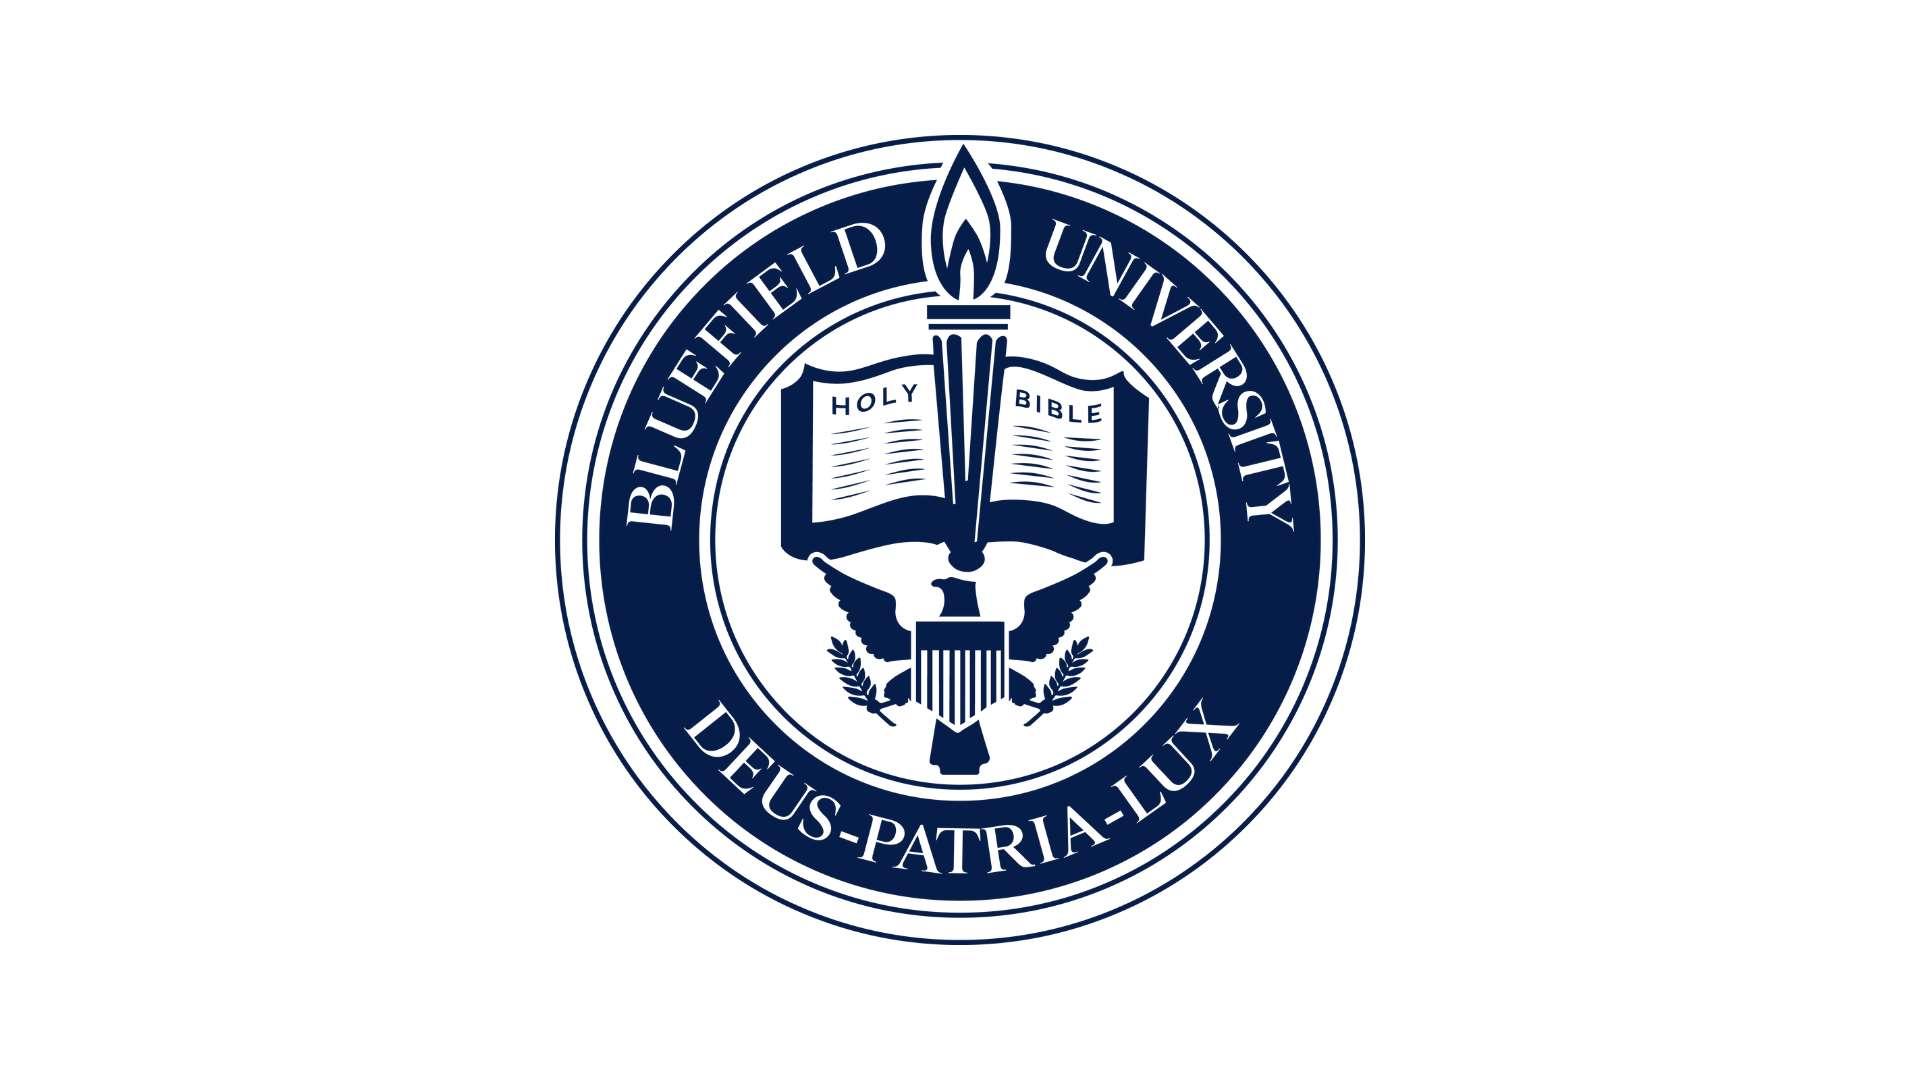 Bluefield University seal with the text "Deus-Patria-Lux".